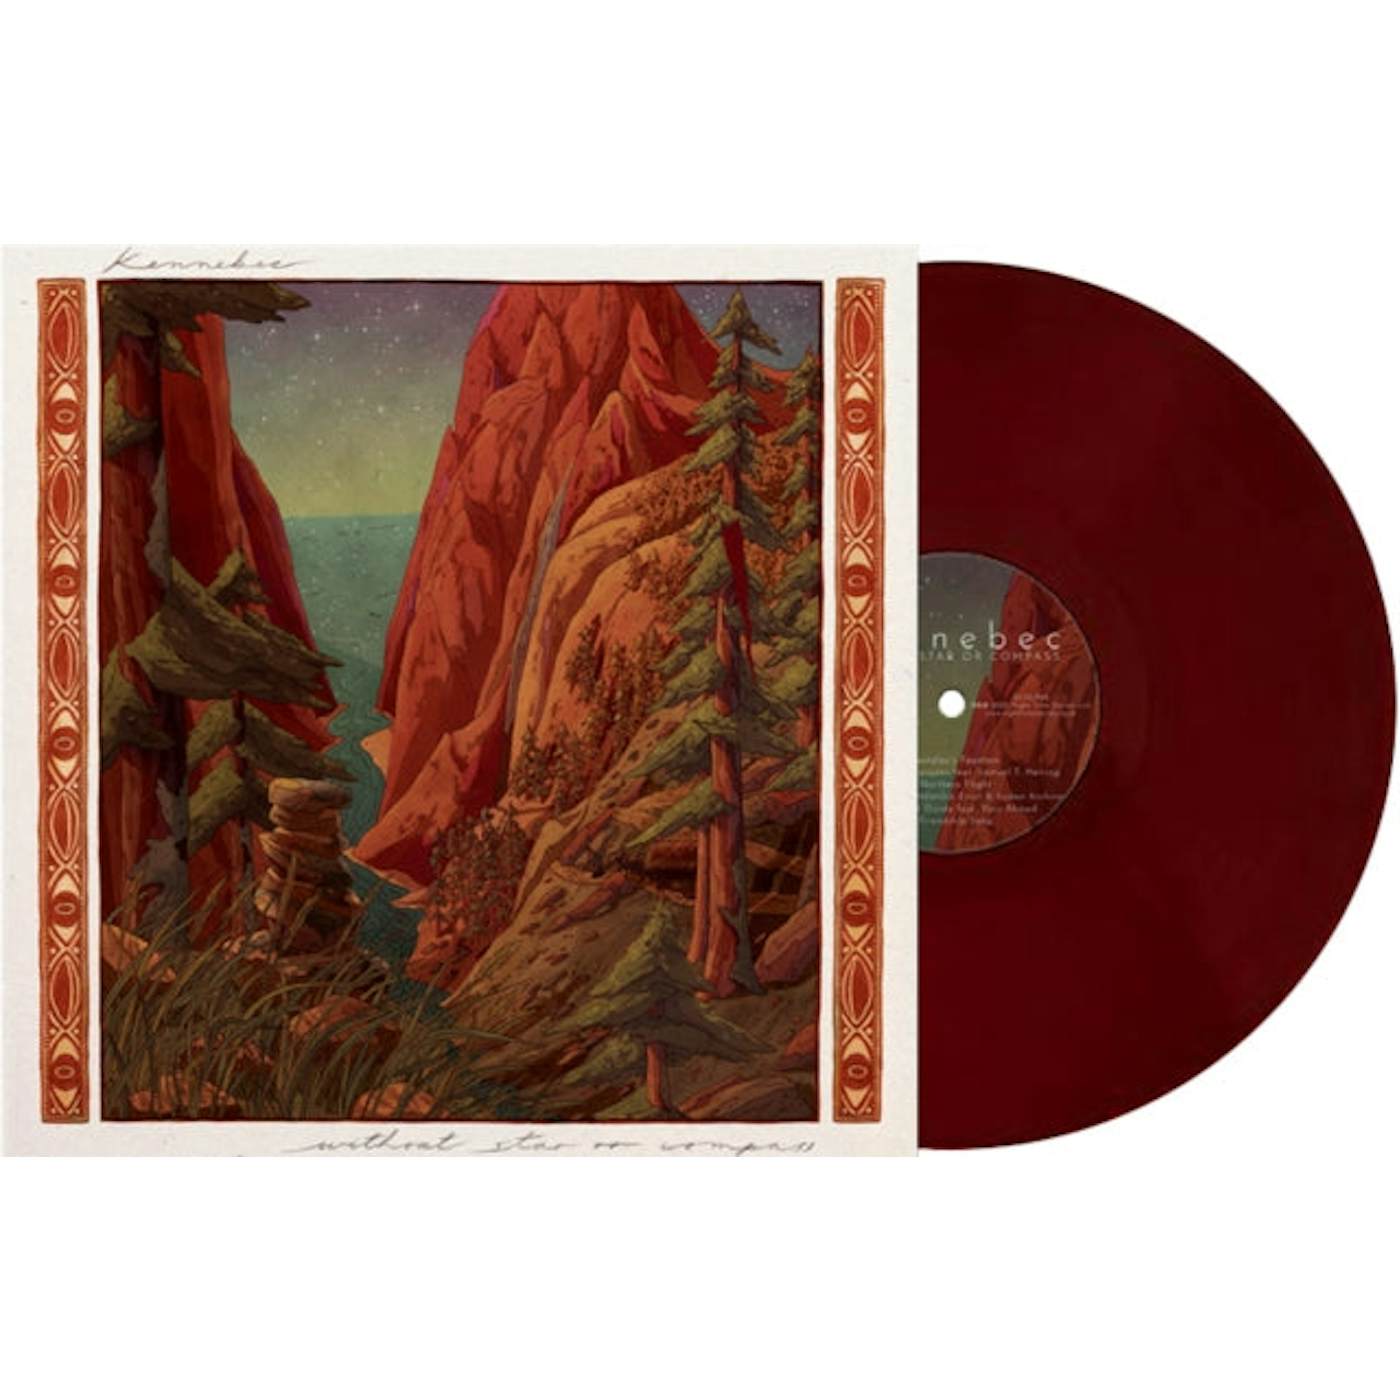 Kennebec LP - With Star Or Compass (Numbered Edition) (Burgundy Vinyl)